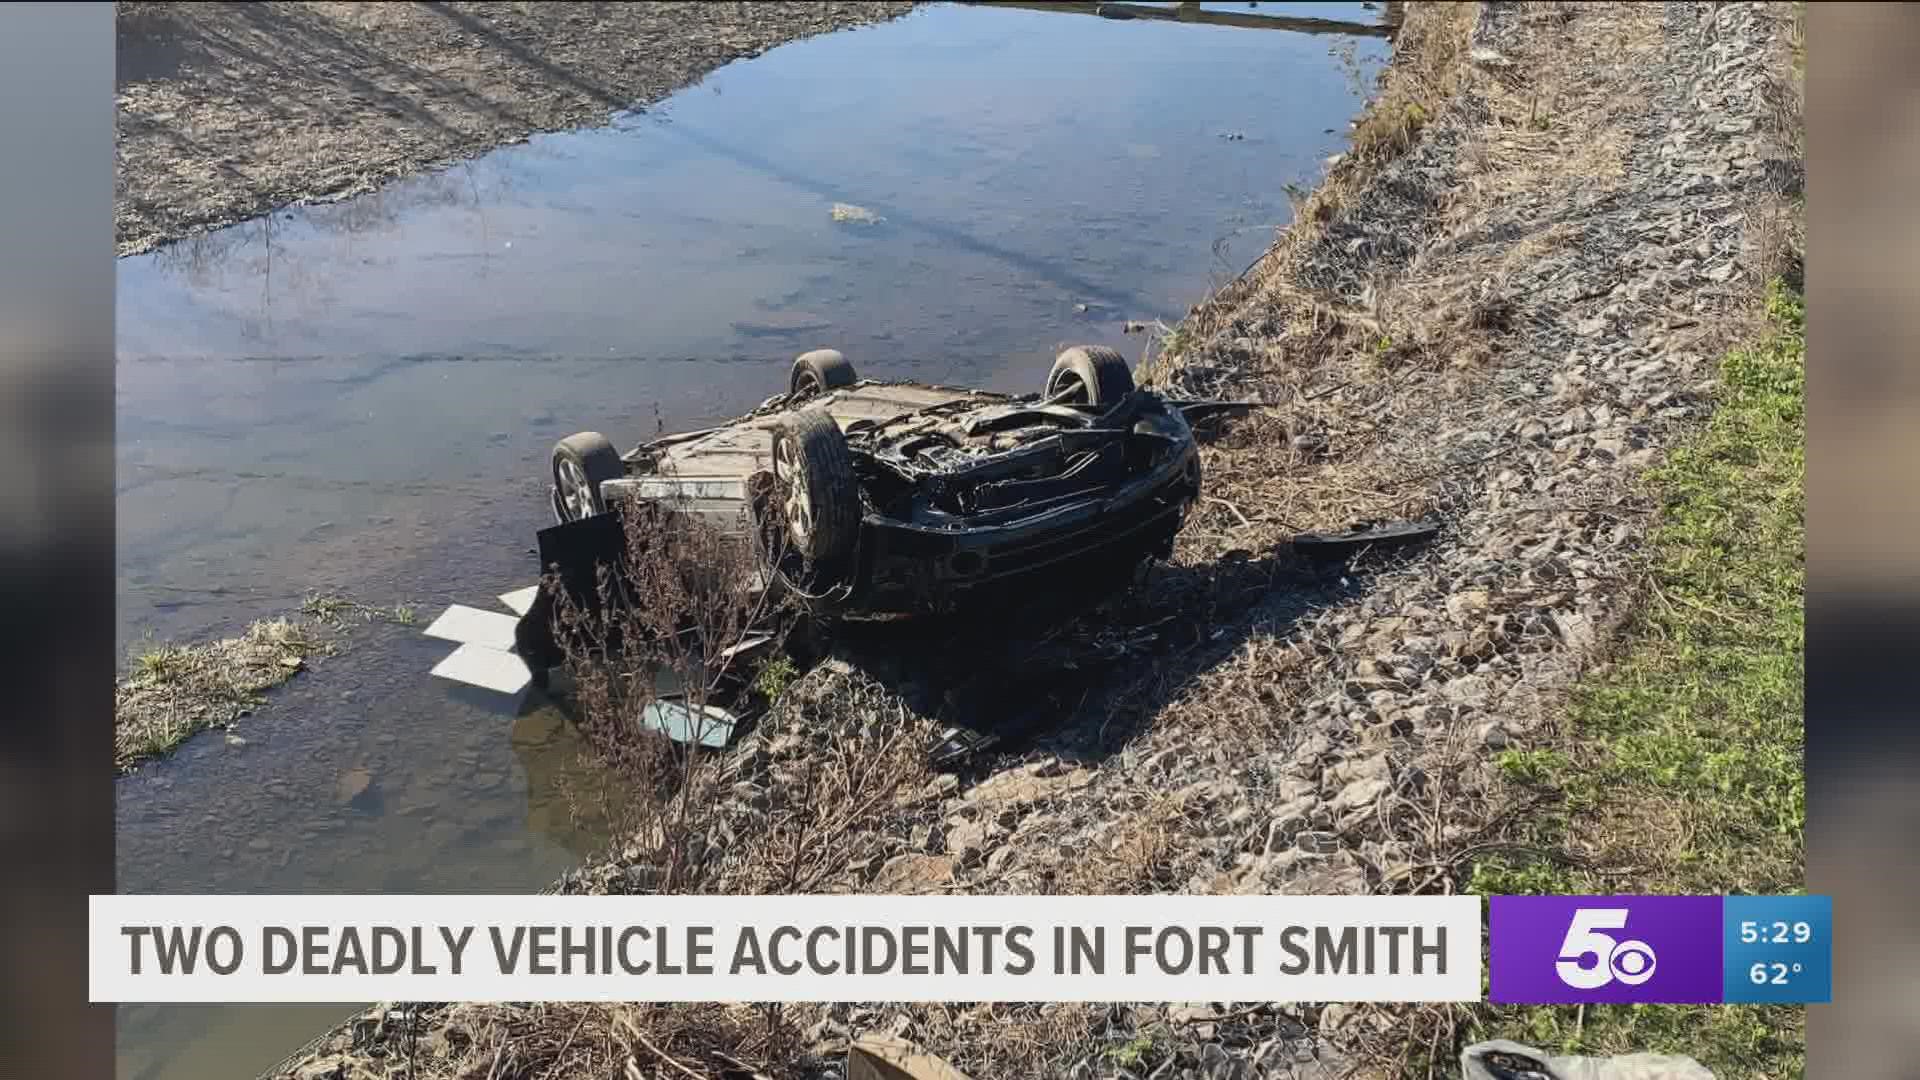 Scooter driver killed in Fort Smith accident - 5newsonline.com